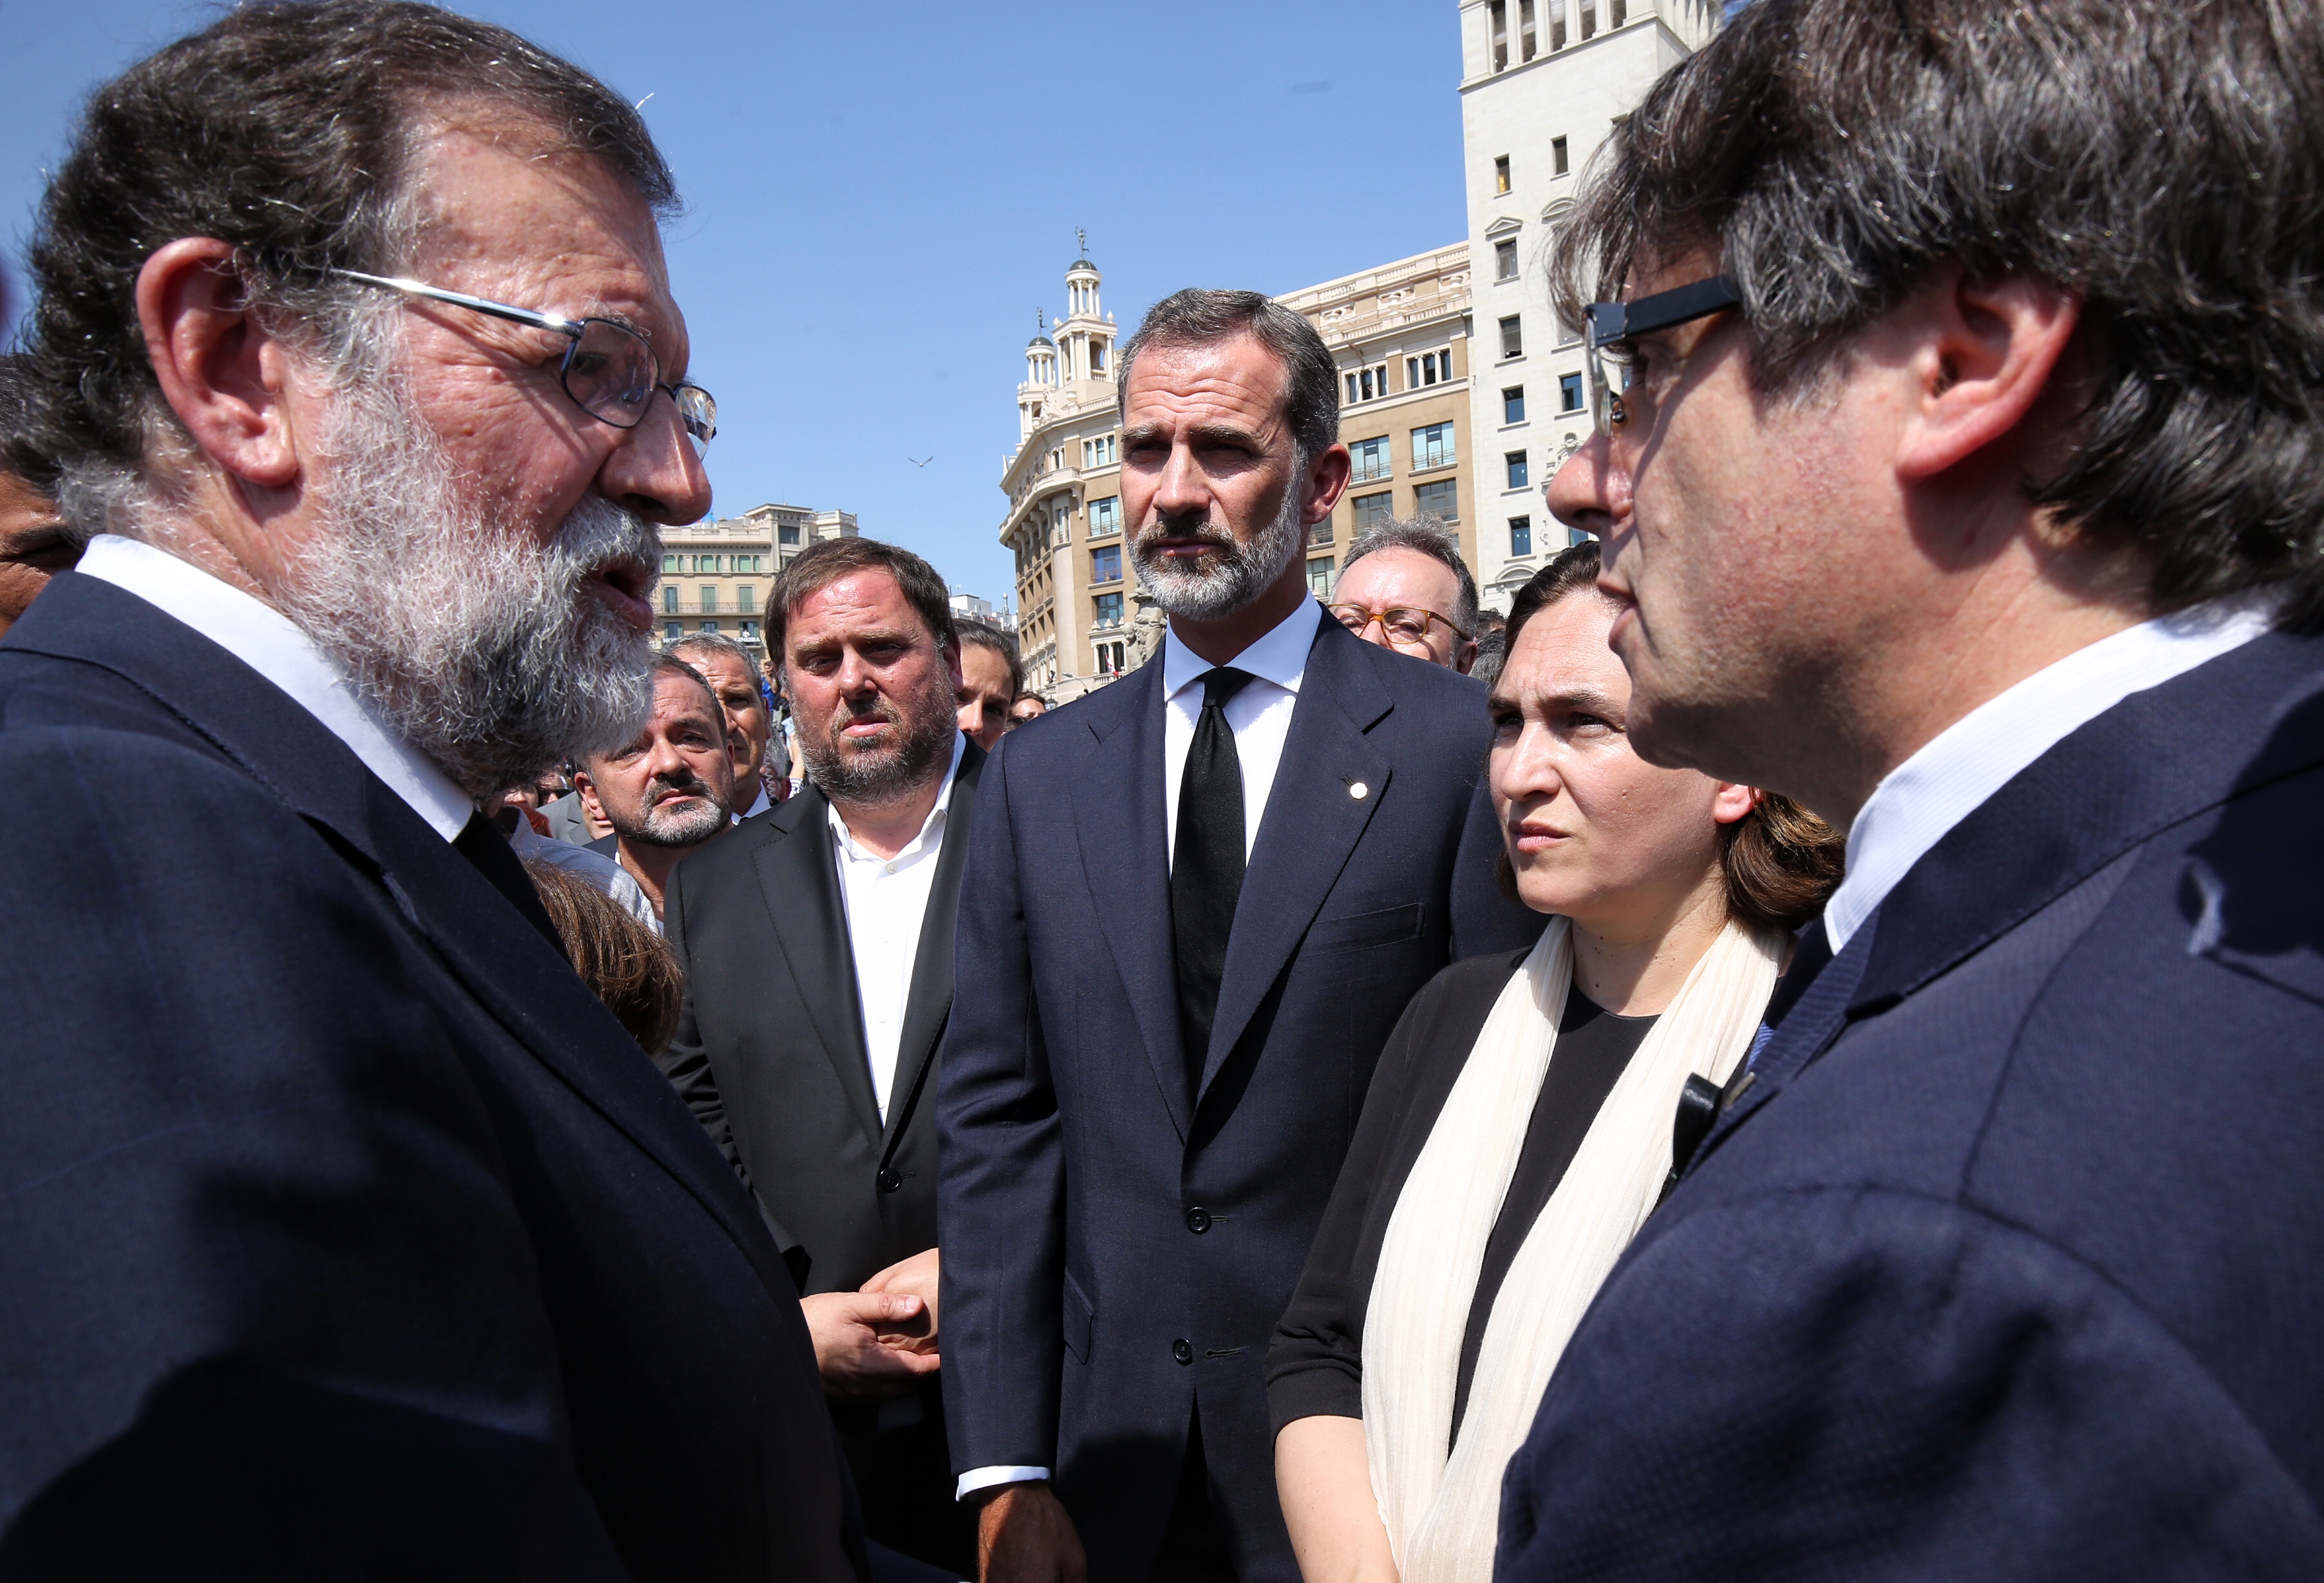 Carles Puigdemont, Mariano Rajoy, Ada Colau, Felipe VI and Oriol Junqueras in August 2017, Barcelona (by ACN)